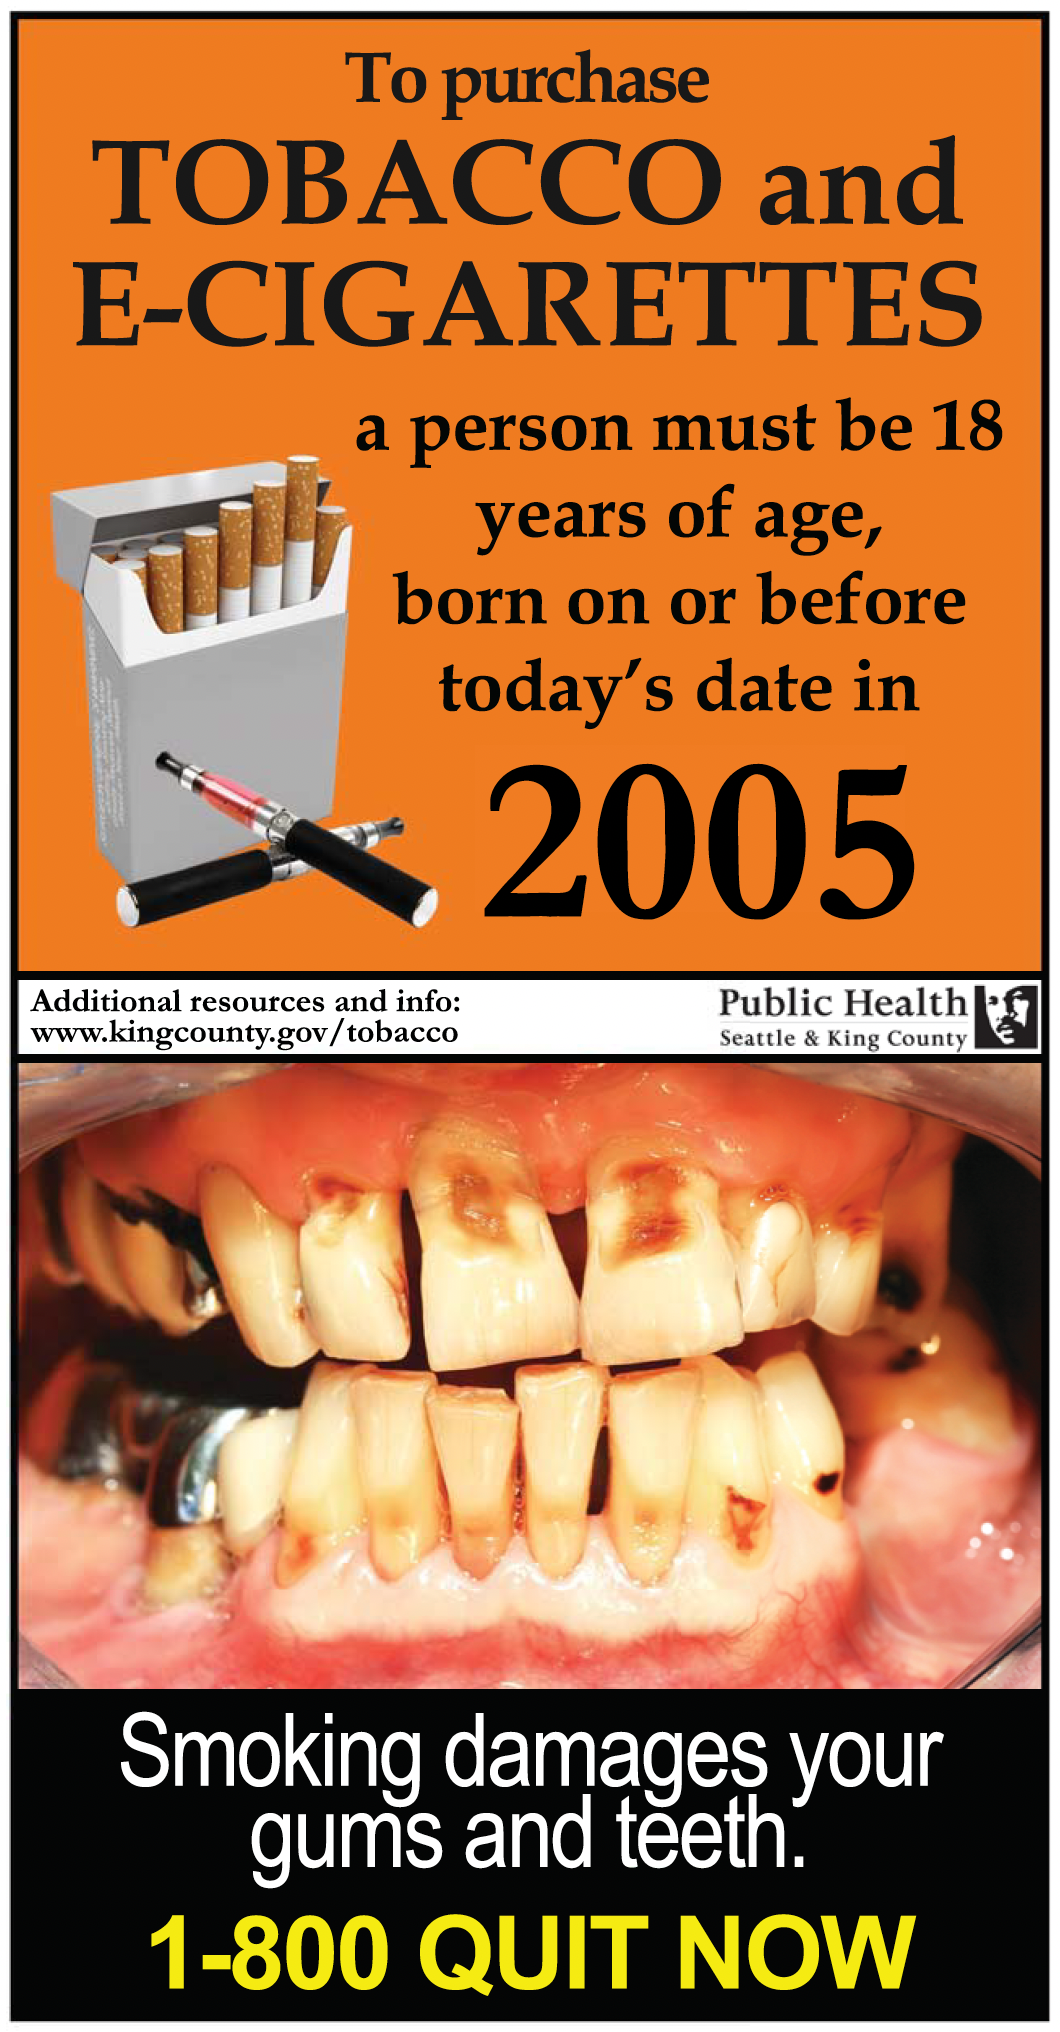 Born before date sign featuring the bad effects smoking has on teeth